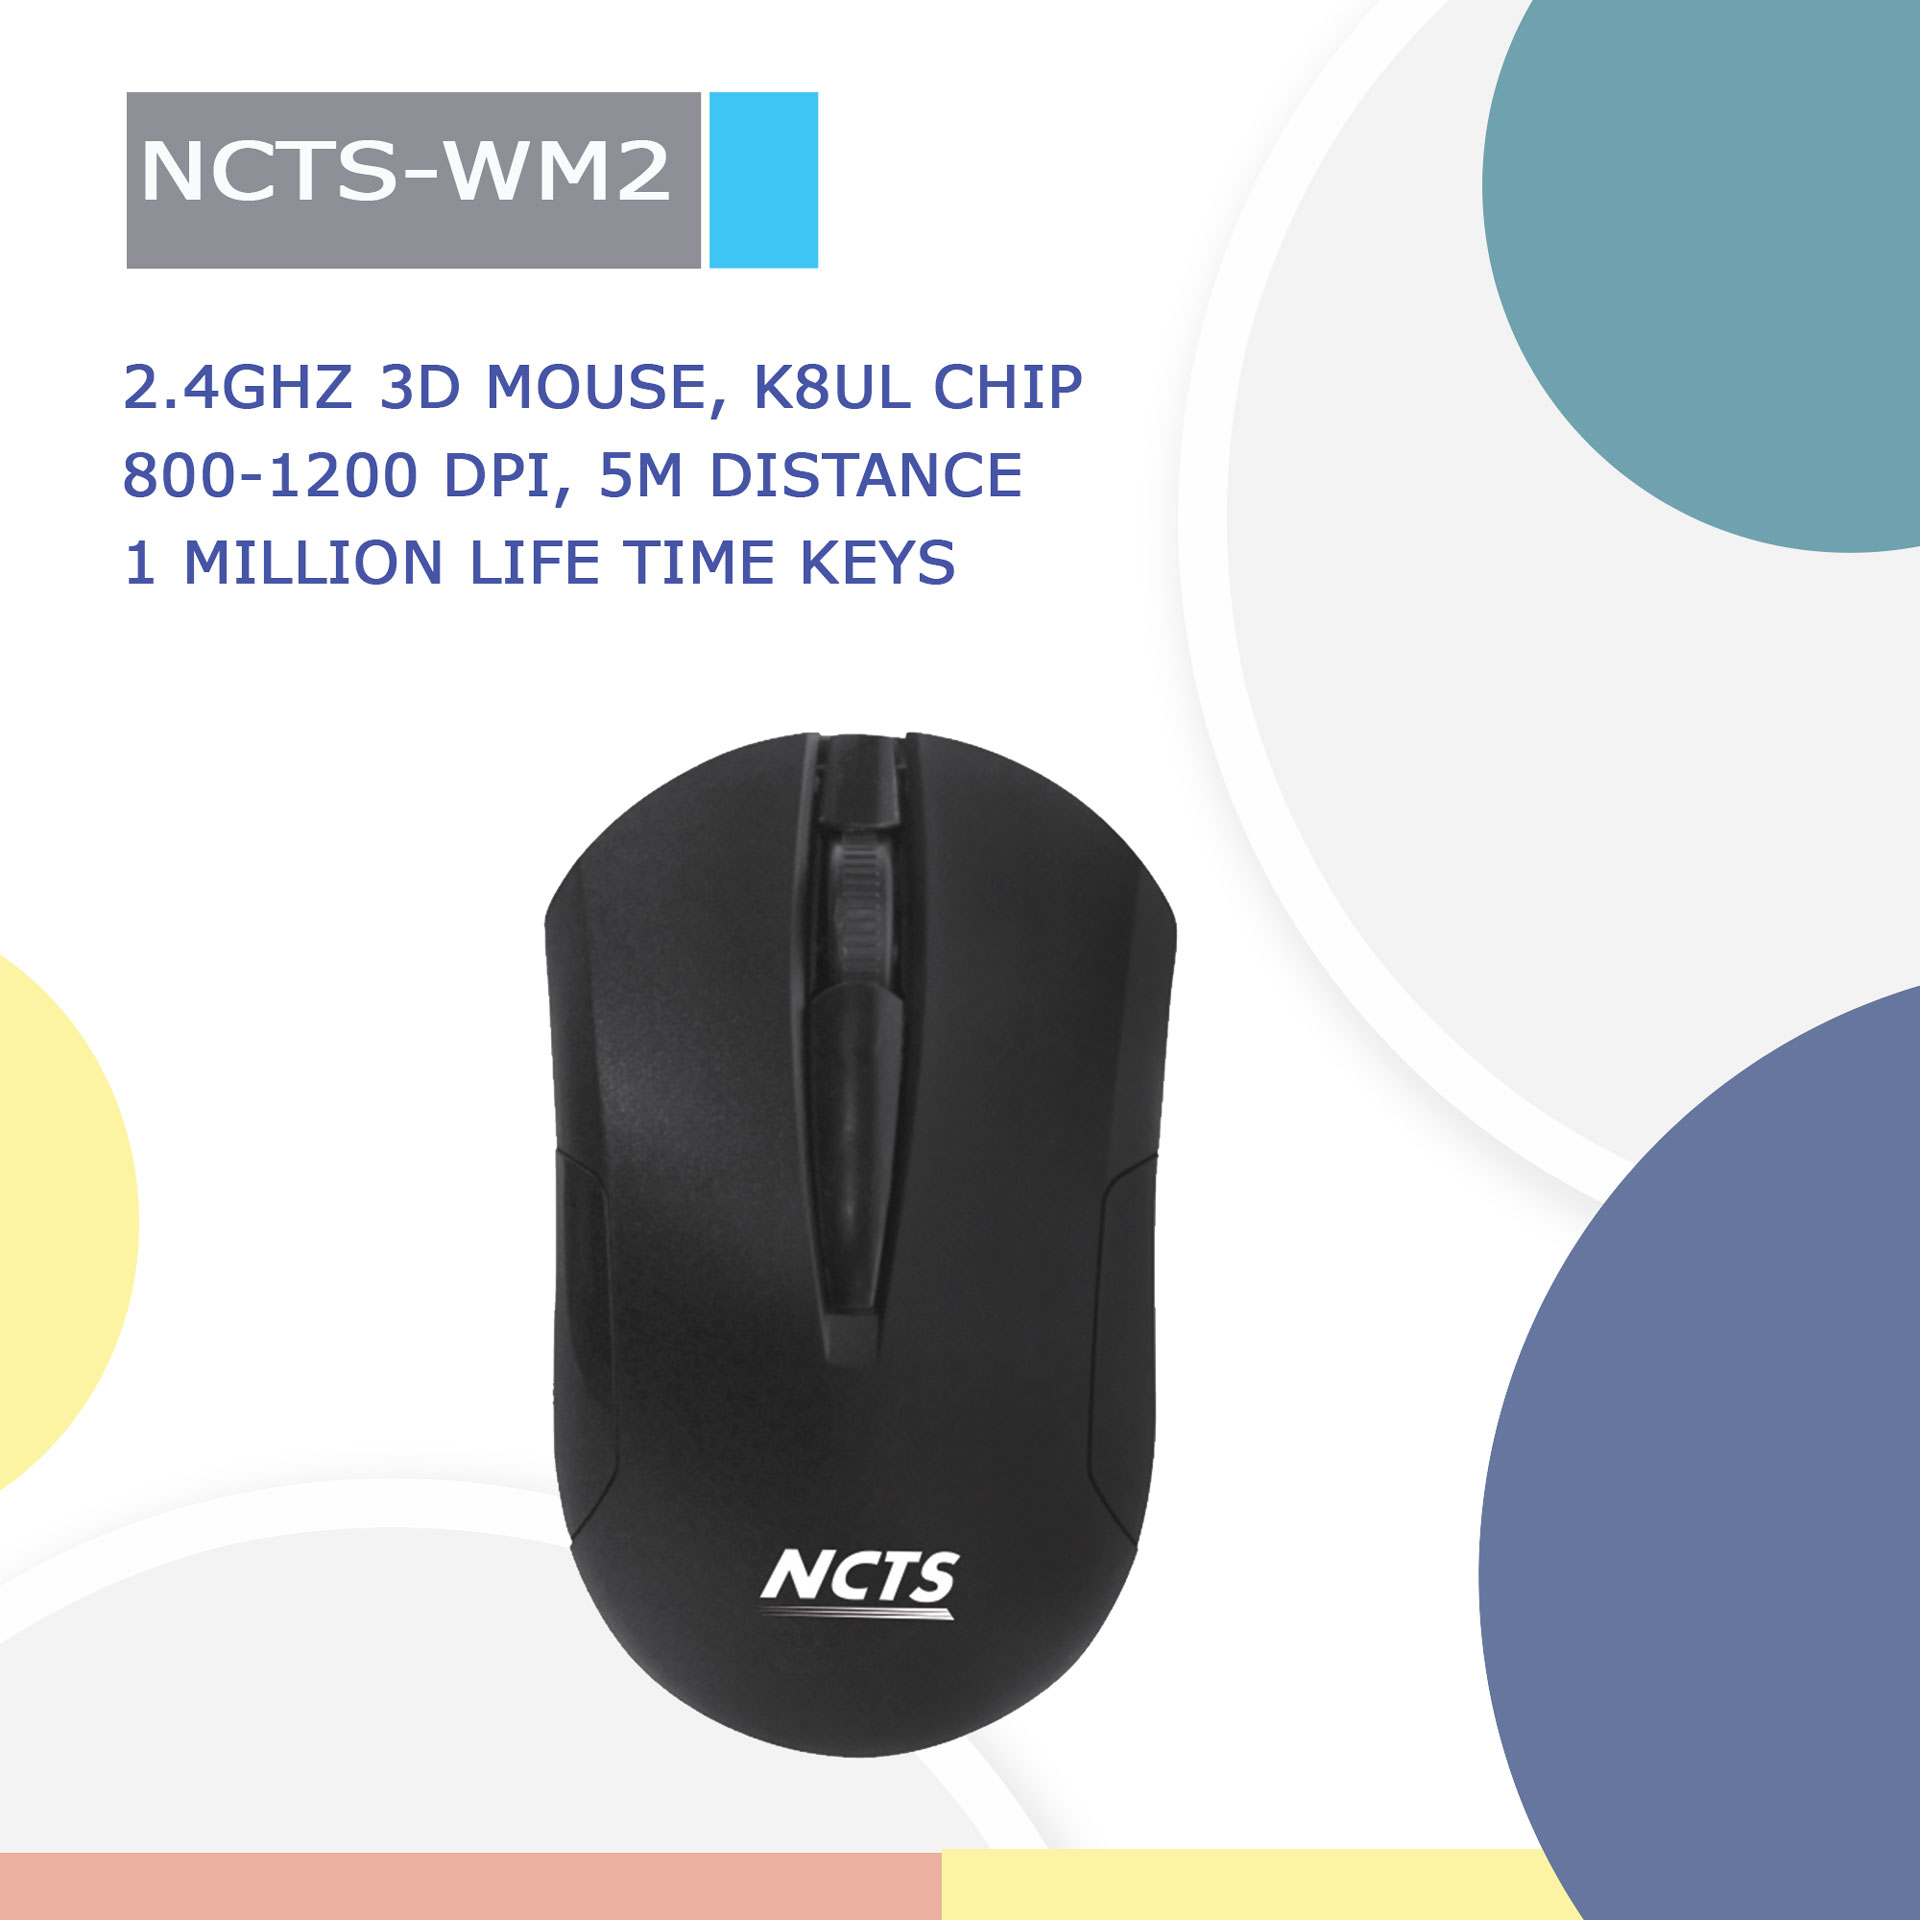 NCTS-WM2